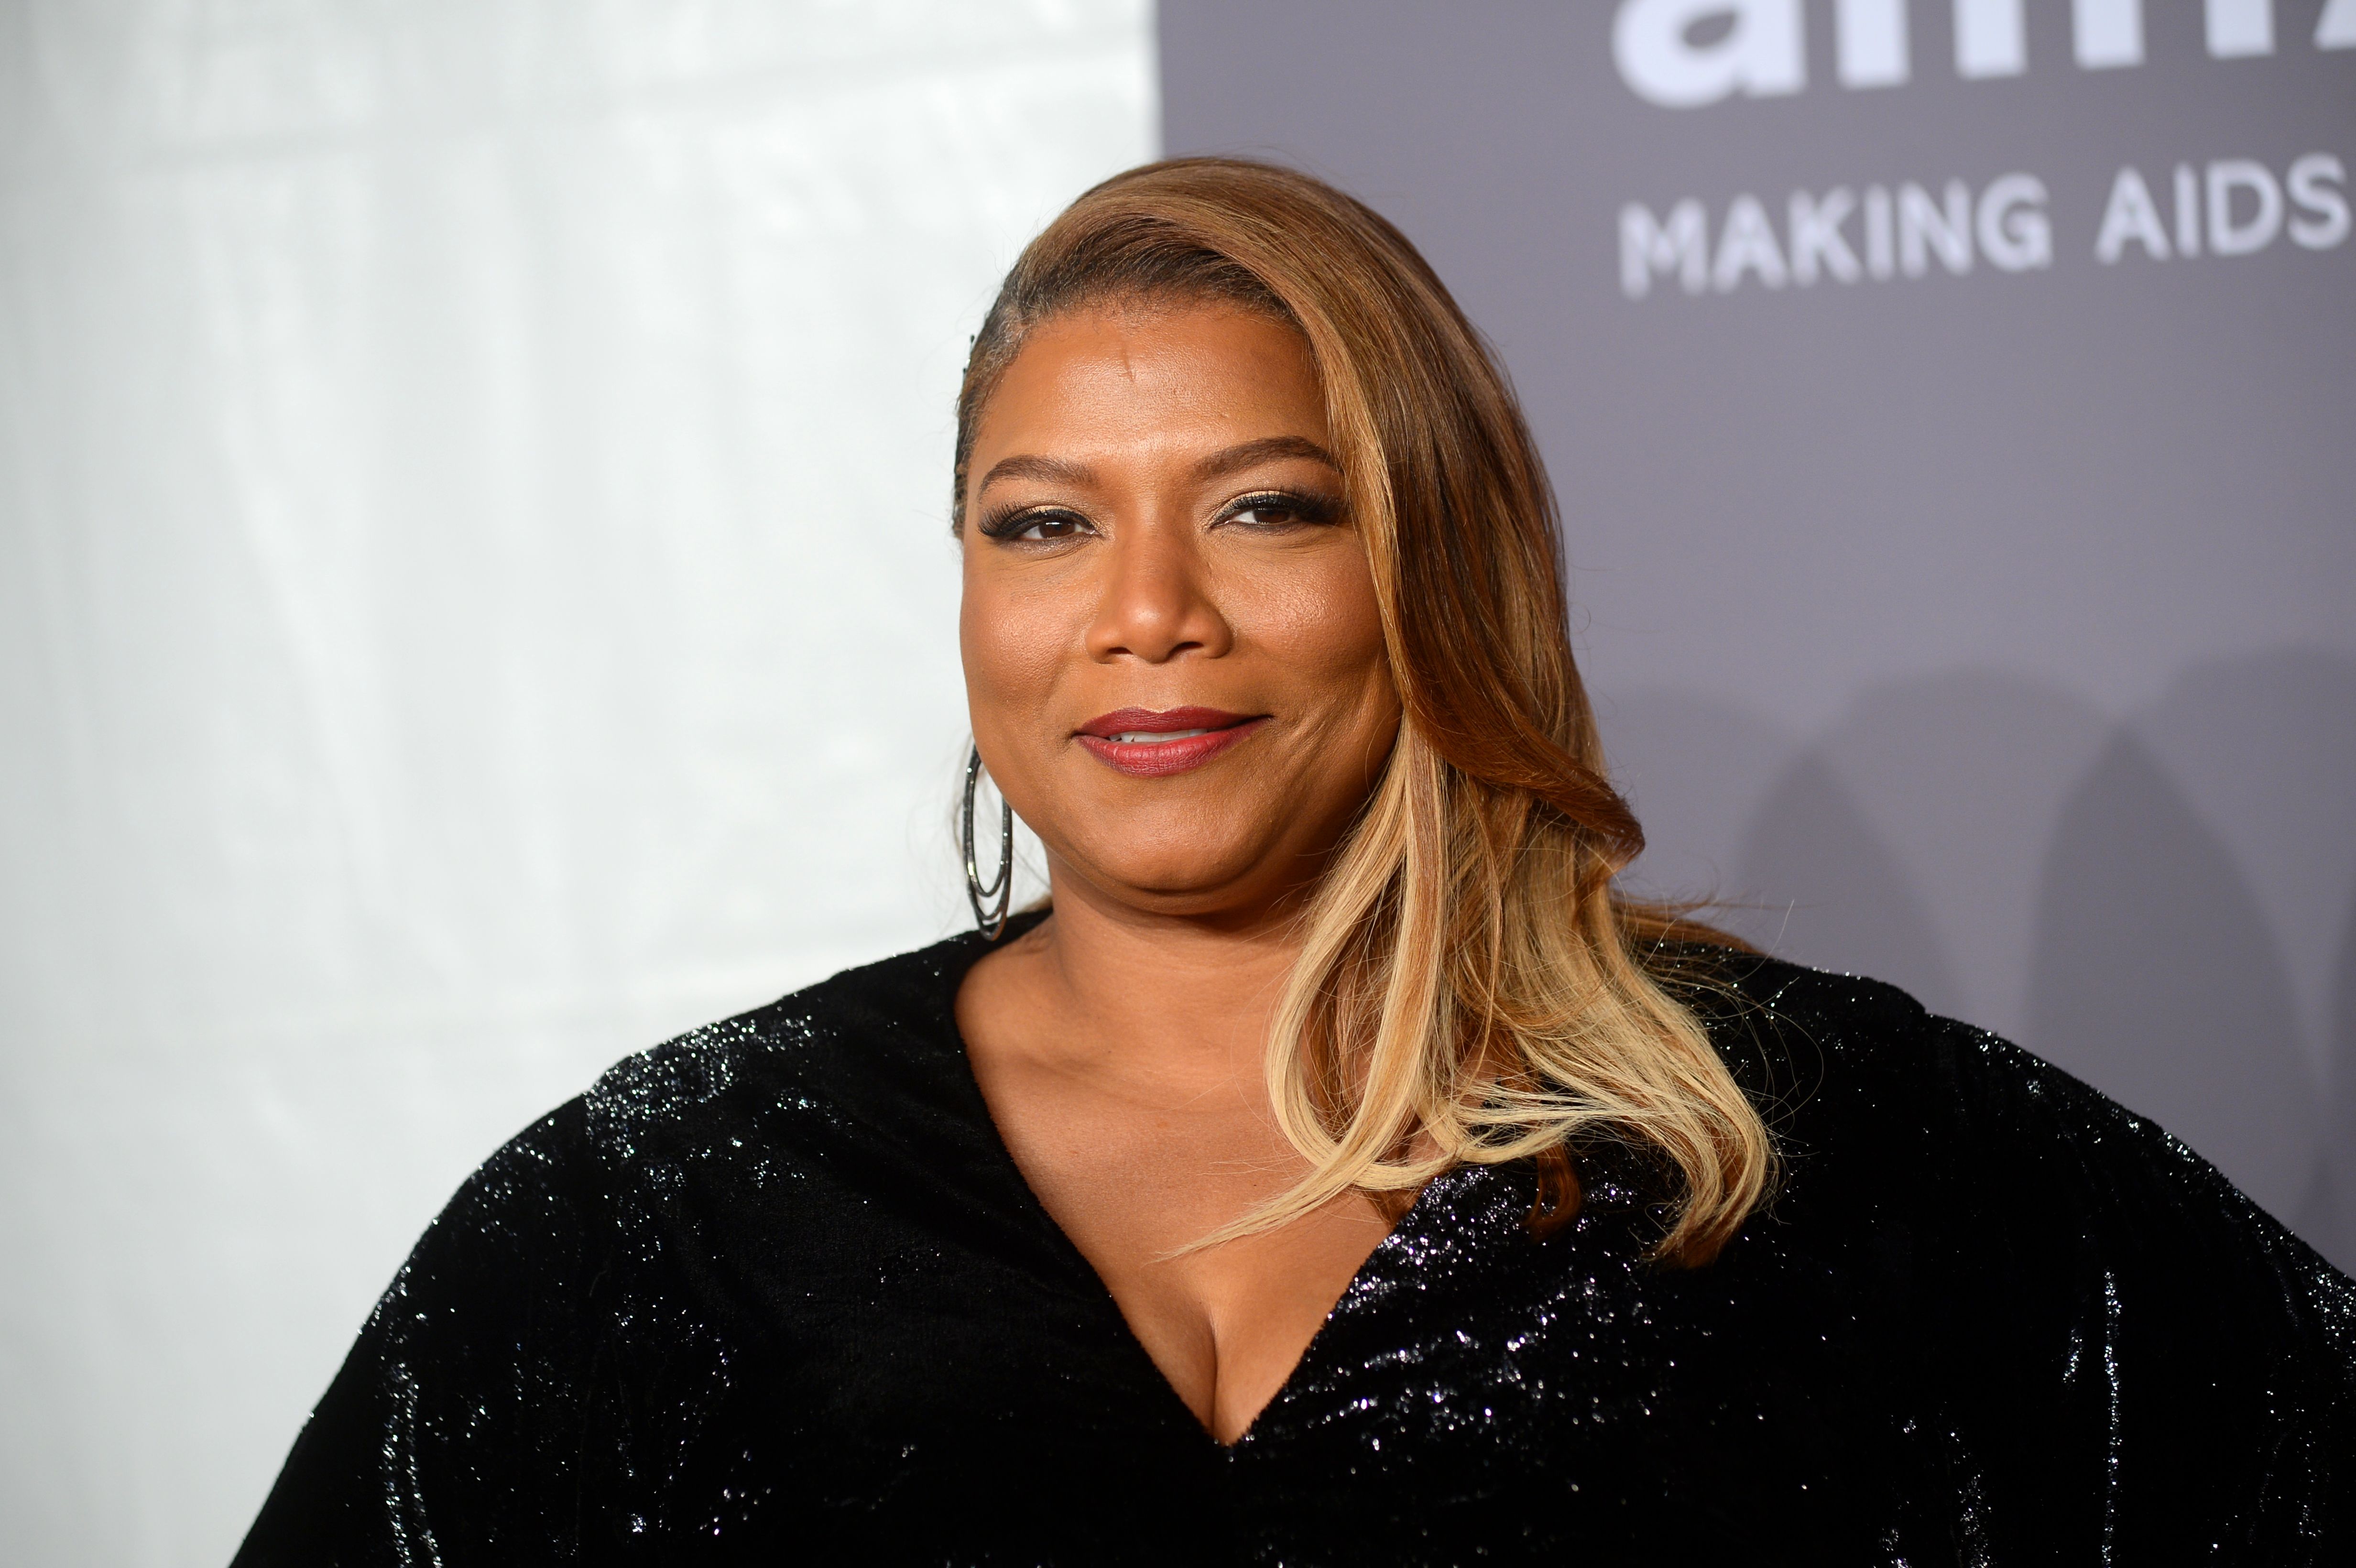 Queen Latifah Wants to Give Female Filmmakers a Voice - TheDailyDay